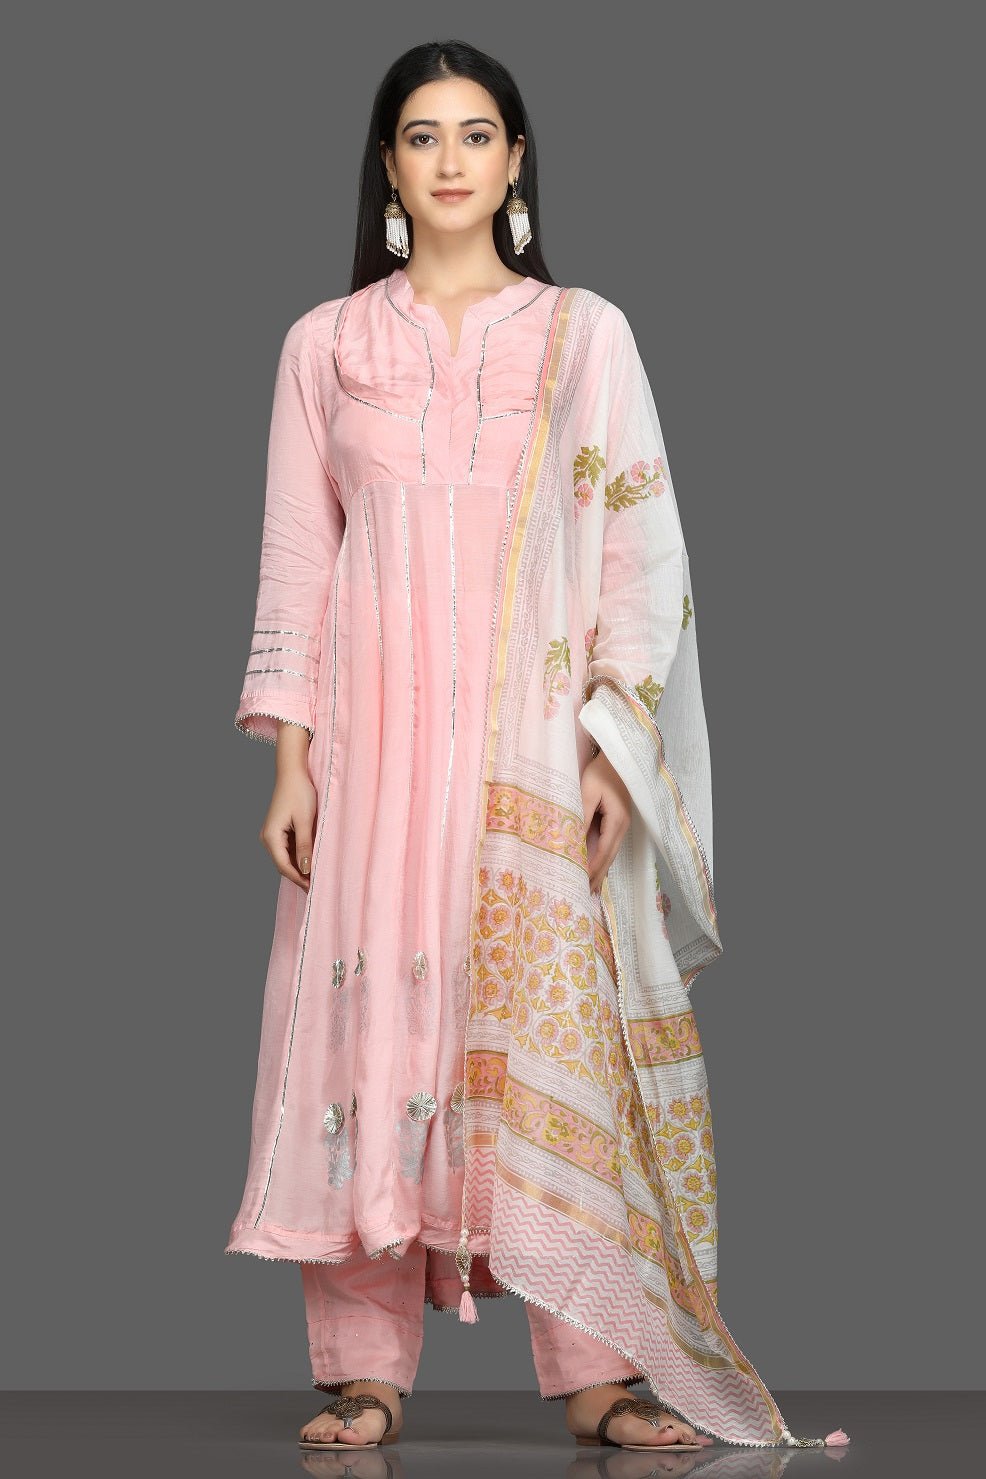 Shop stunning pink gota work silk suit online in USA with white printed dupatta. Shop for parties and festive occasions stunning designer suits, Anarkali suits, designer gowns, wedding lehengas from Pure Elegance Indian fashion store in USA.-full view